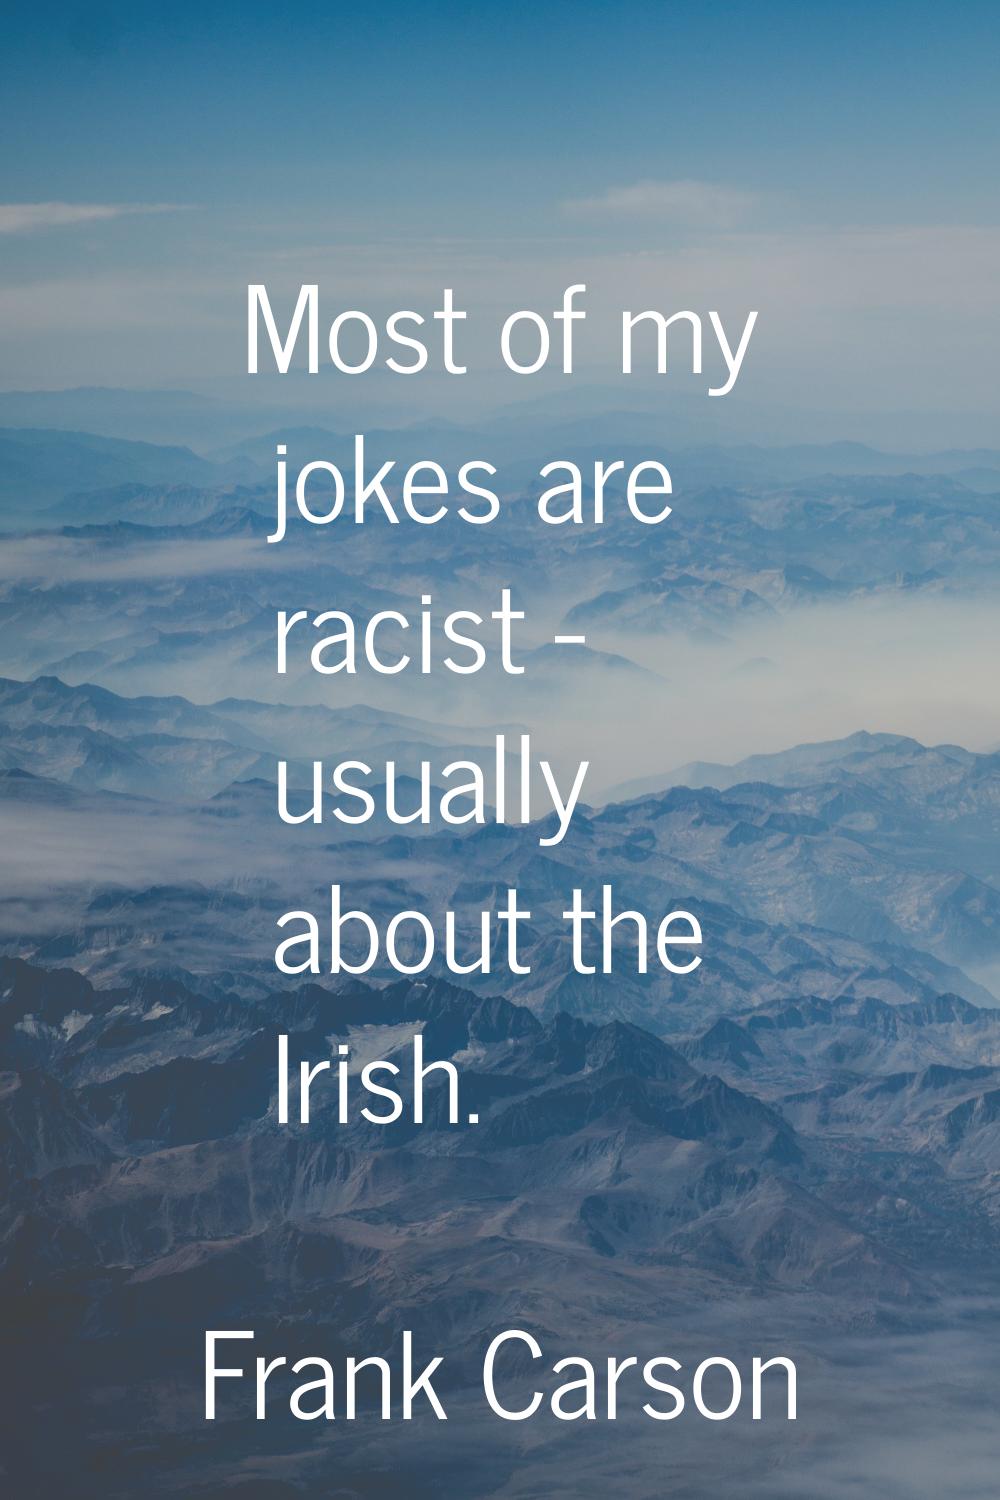 Most of my jokes are racist - usually about the Irish.